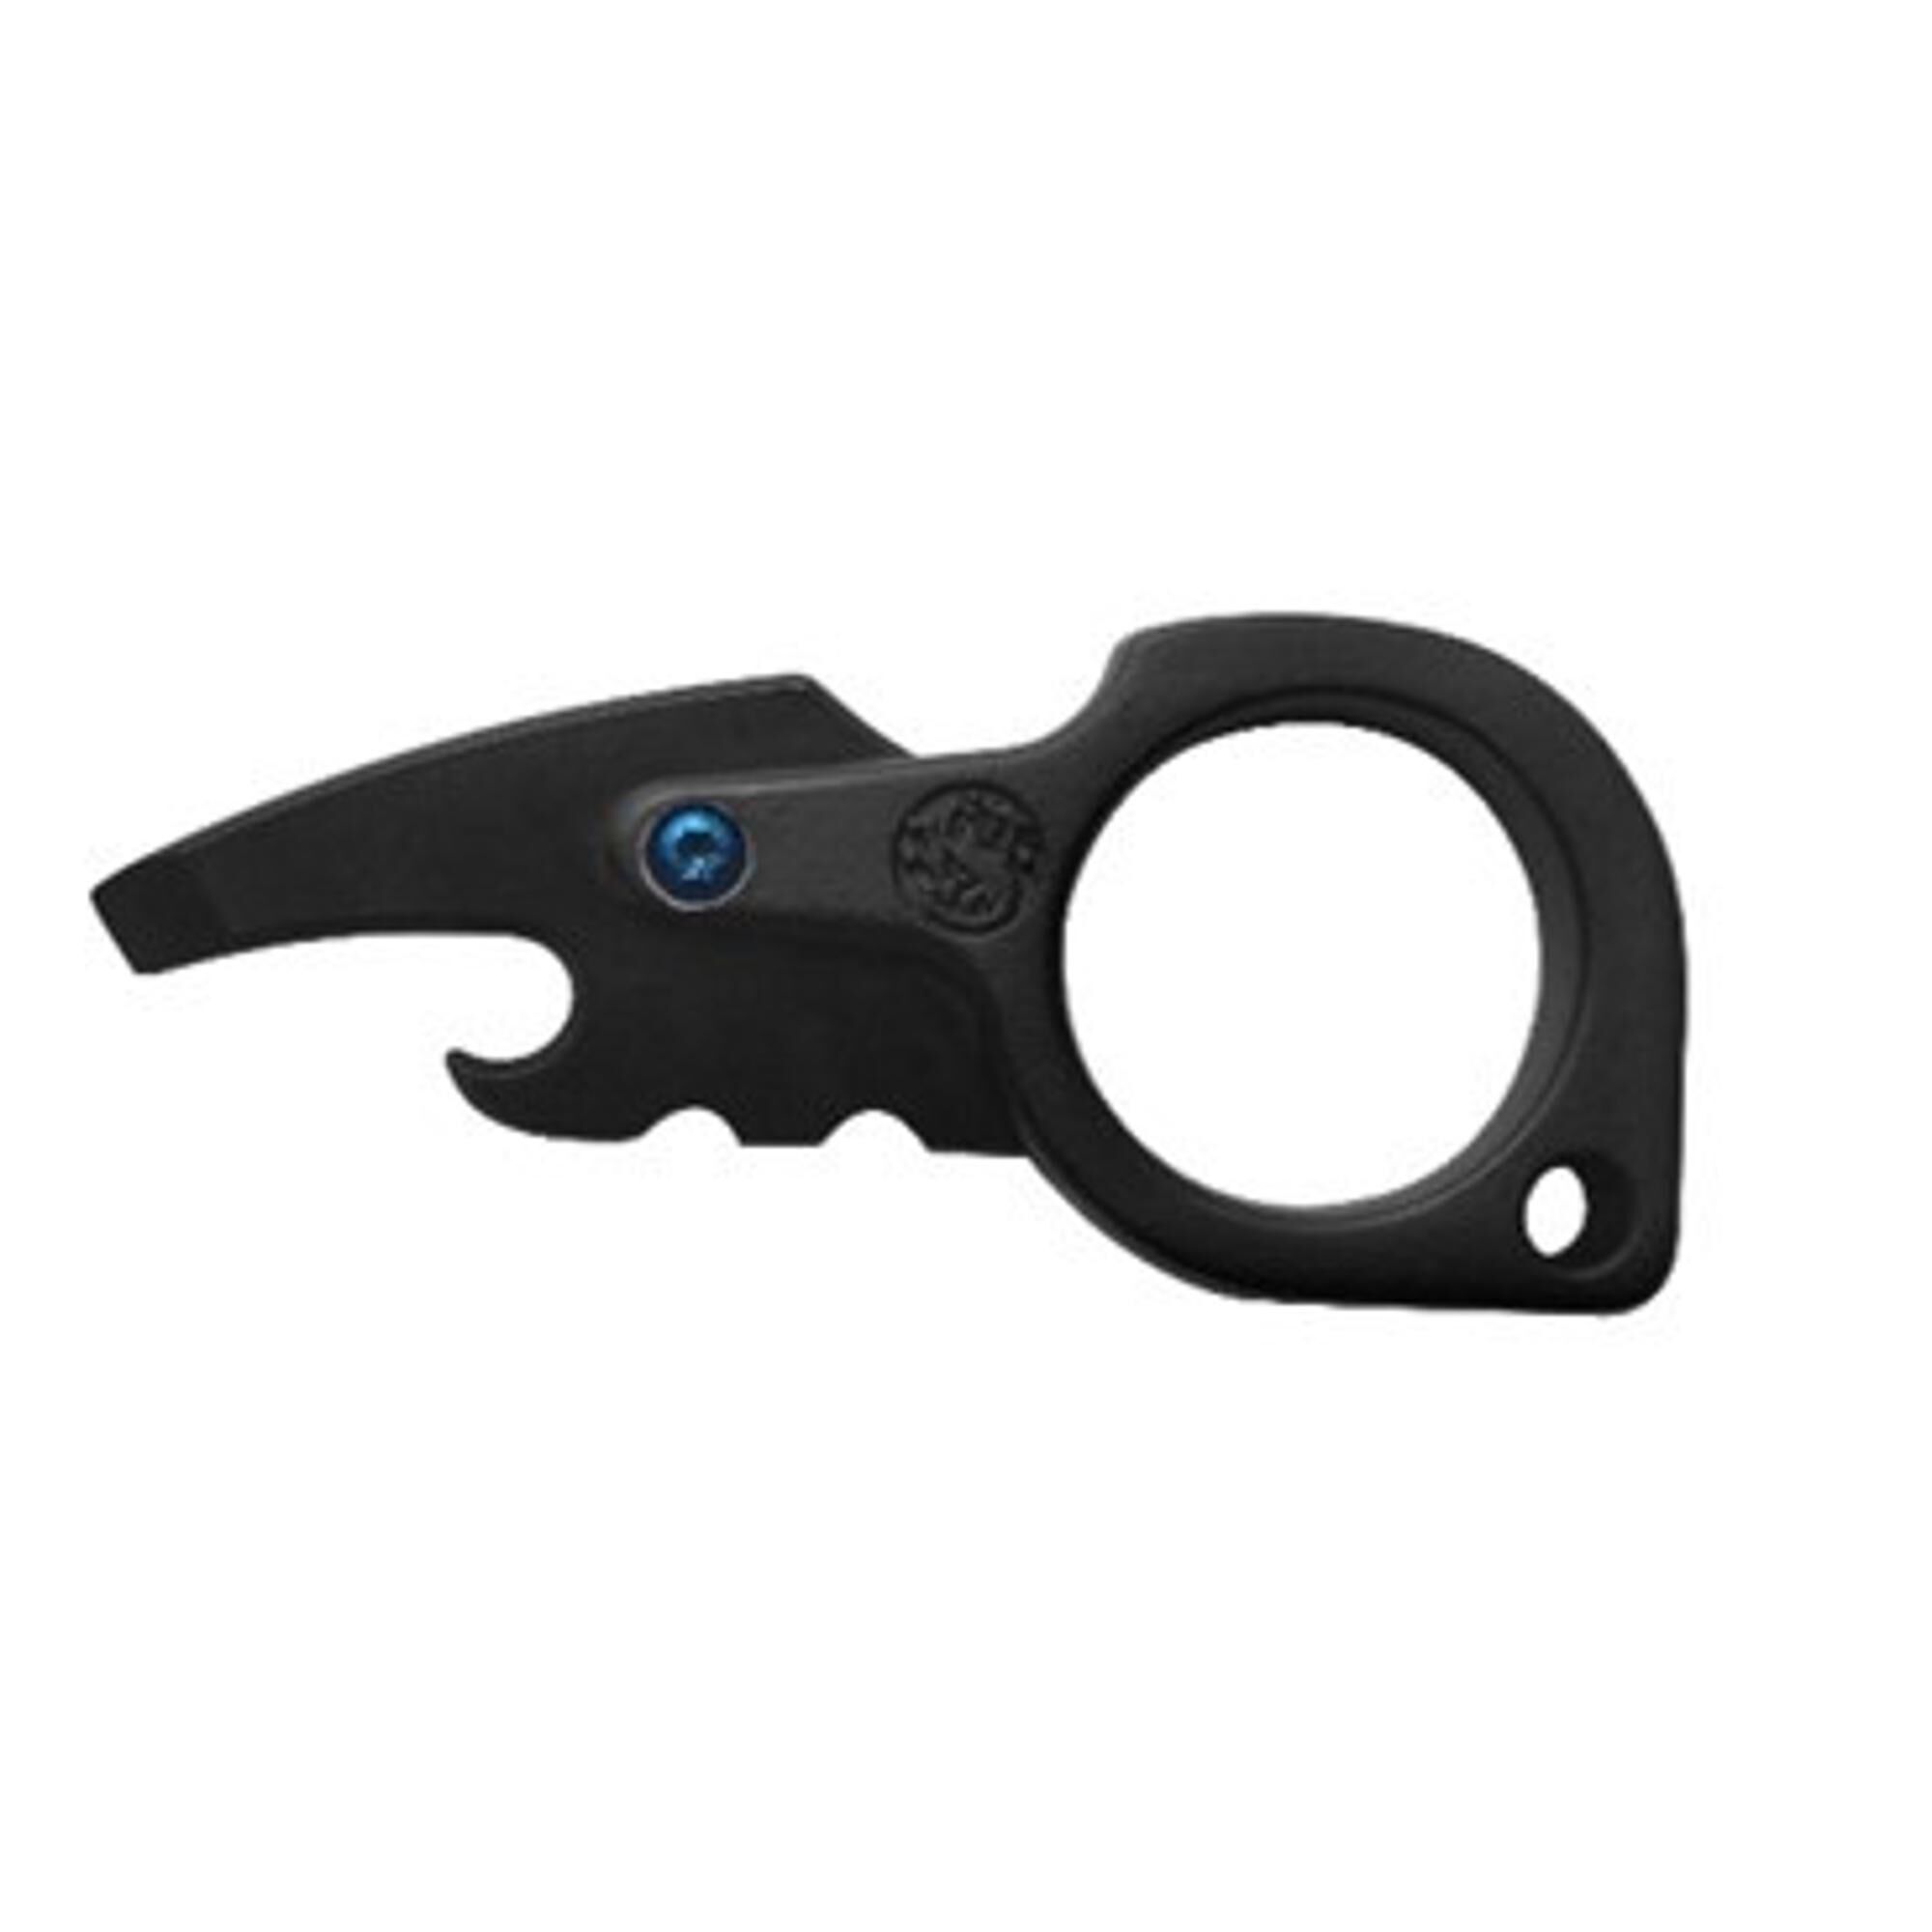 S&W® Clip Fold Liner Lock Knife | Smith & Wesson